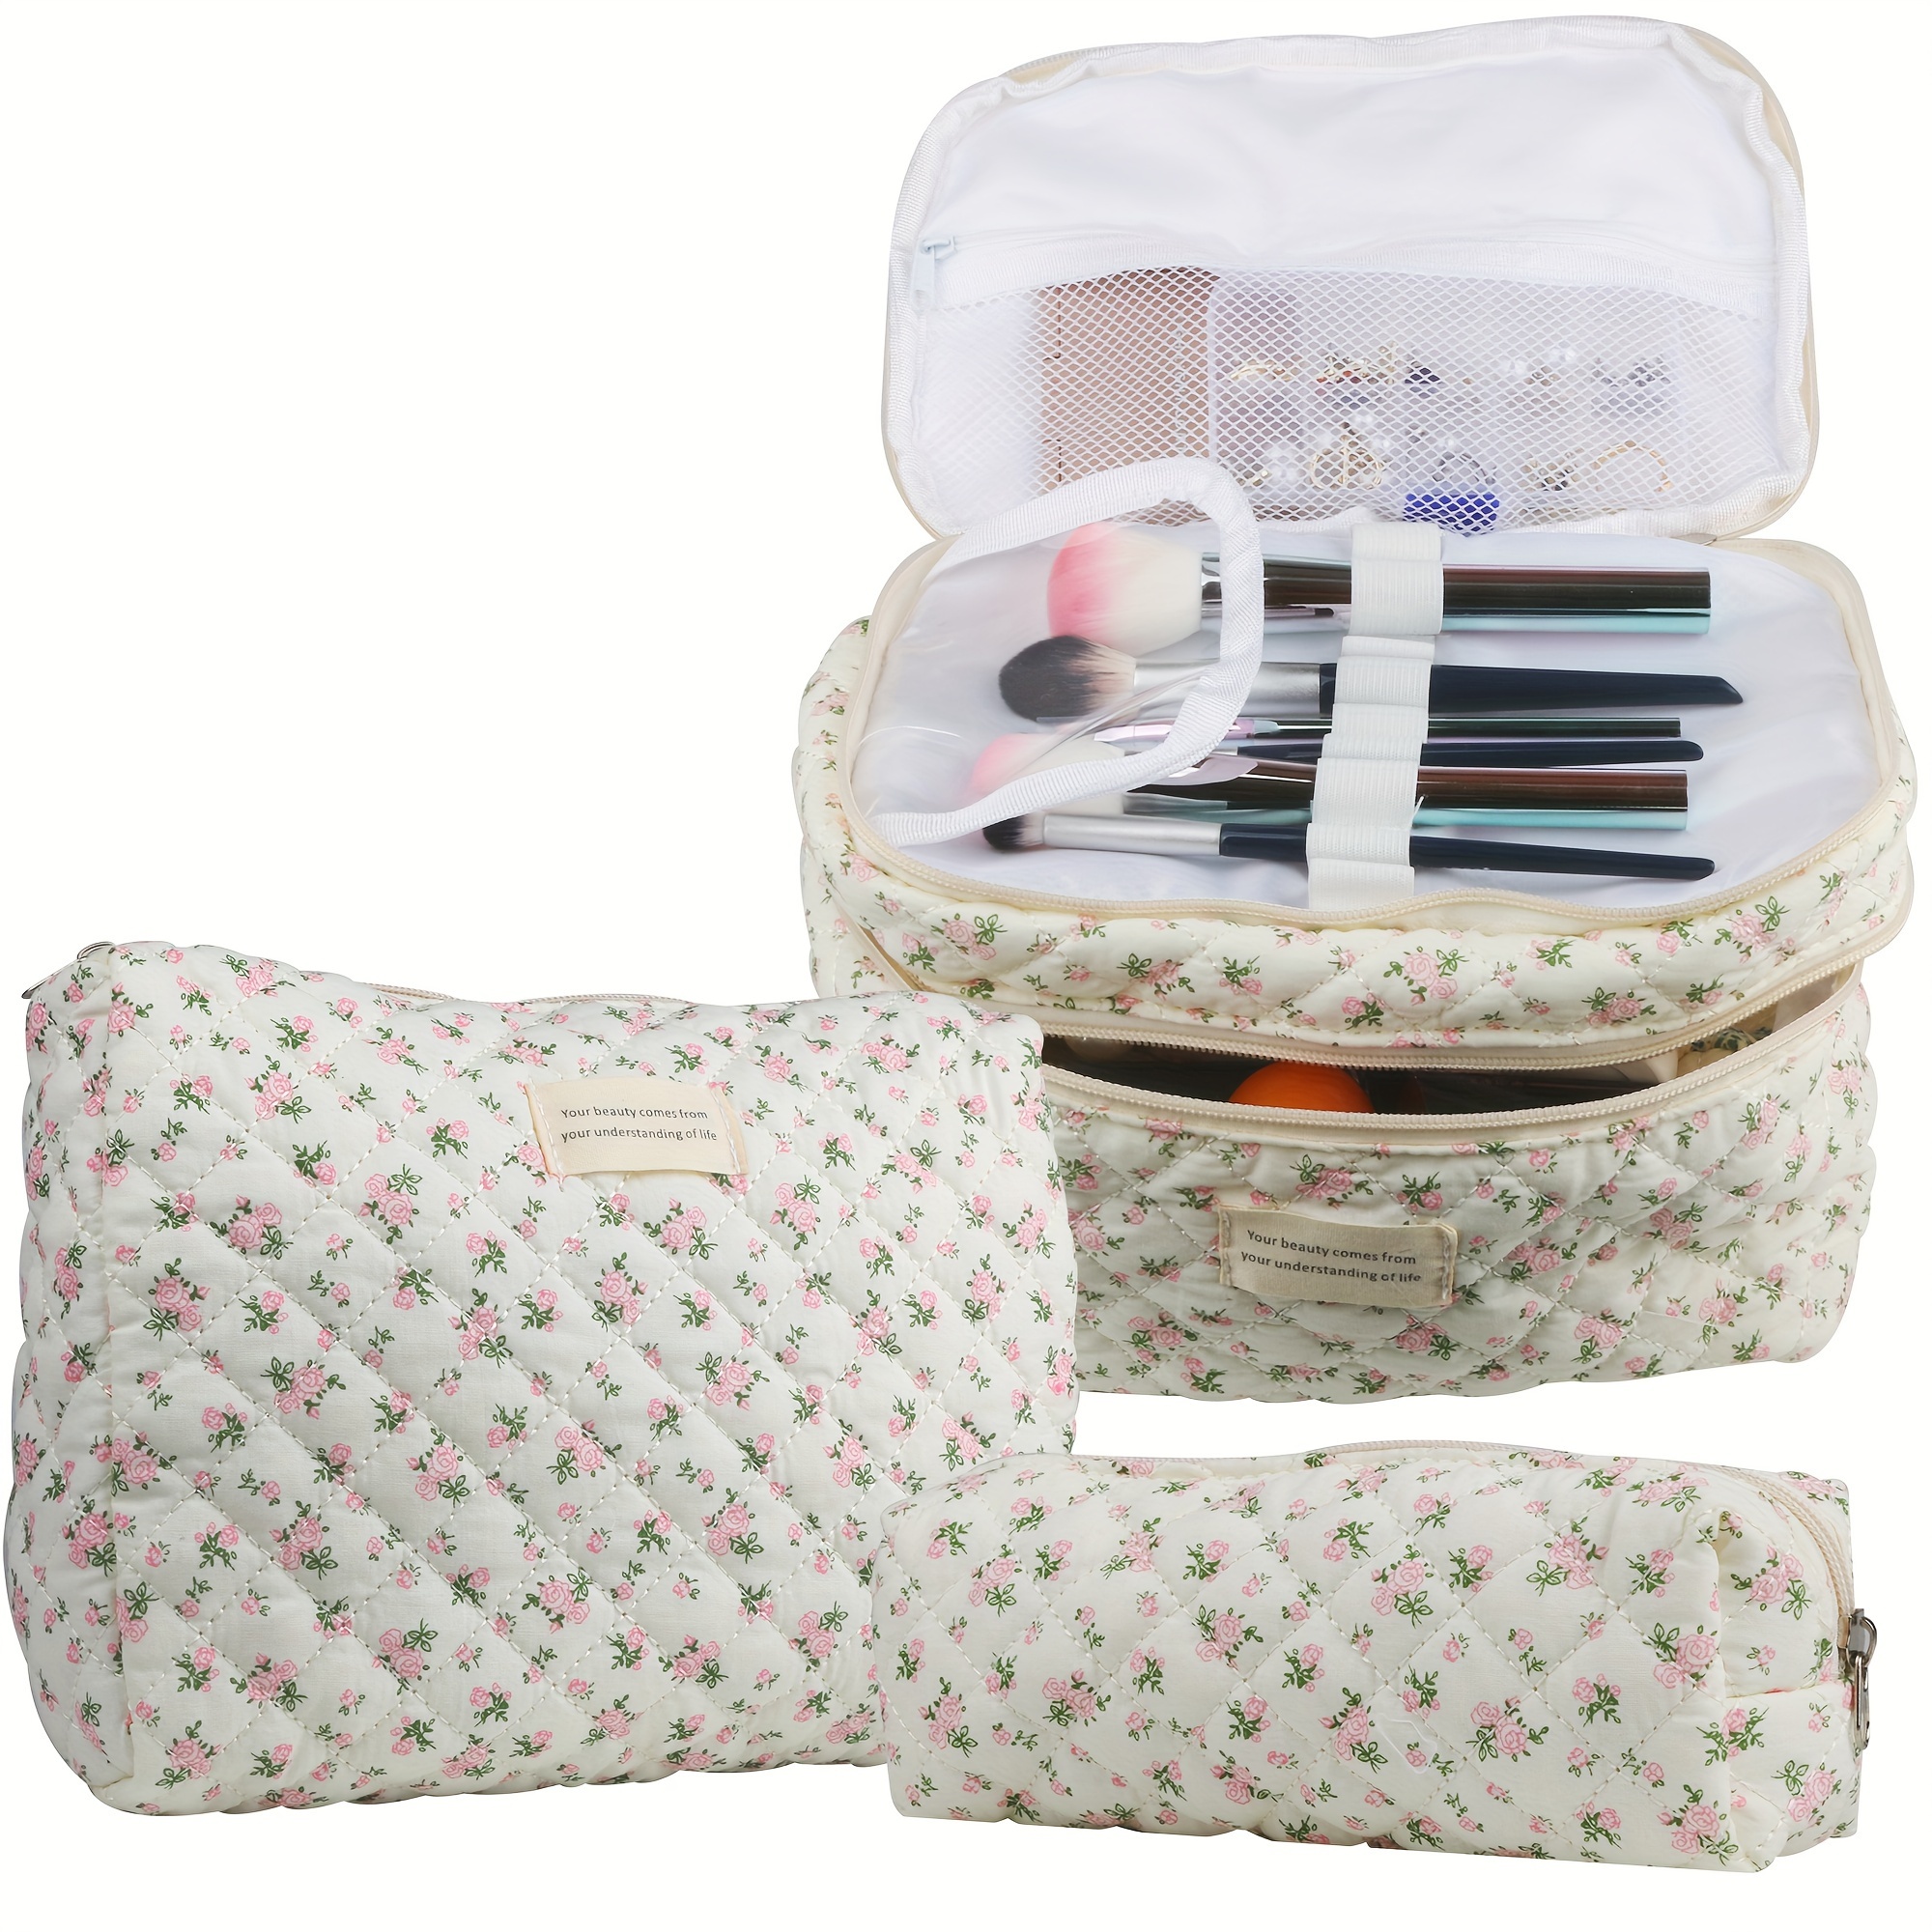 

Large Capacity Dual Layer Cotton Makeup Cosmetic Bag (3pcs), Cute Quilted Travel Coquette Aesthetic Floral Make Up Bag For Women Toiletry Bag